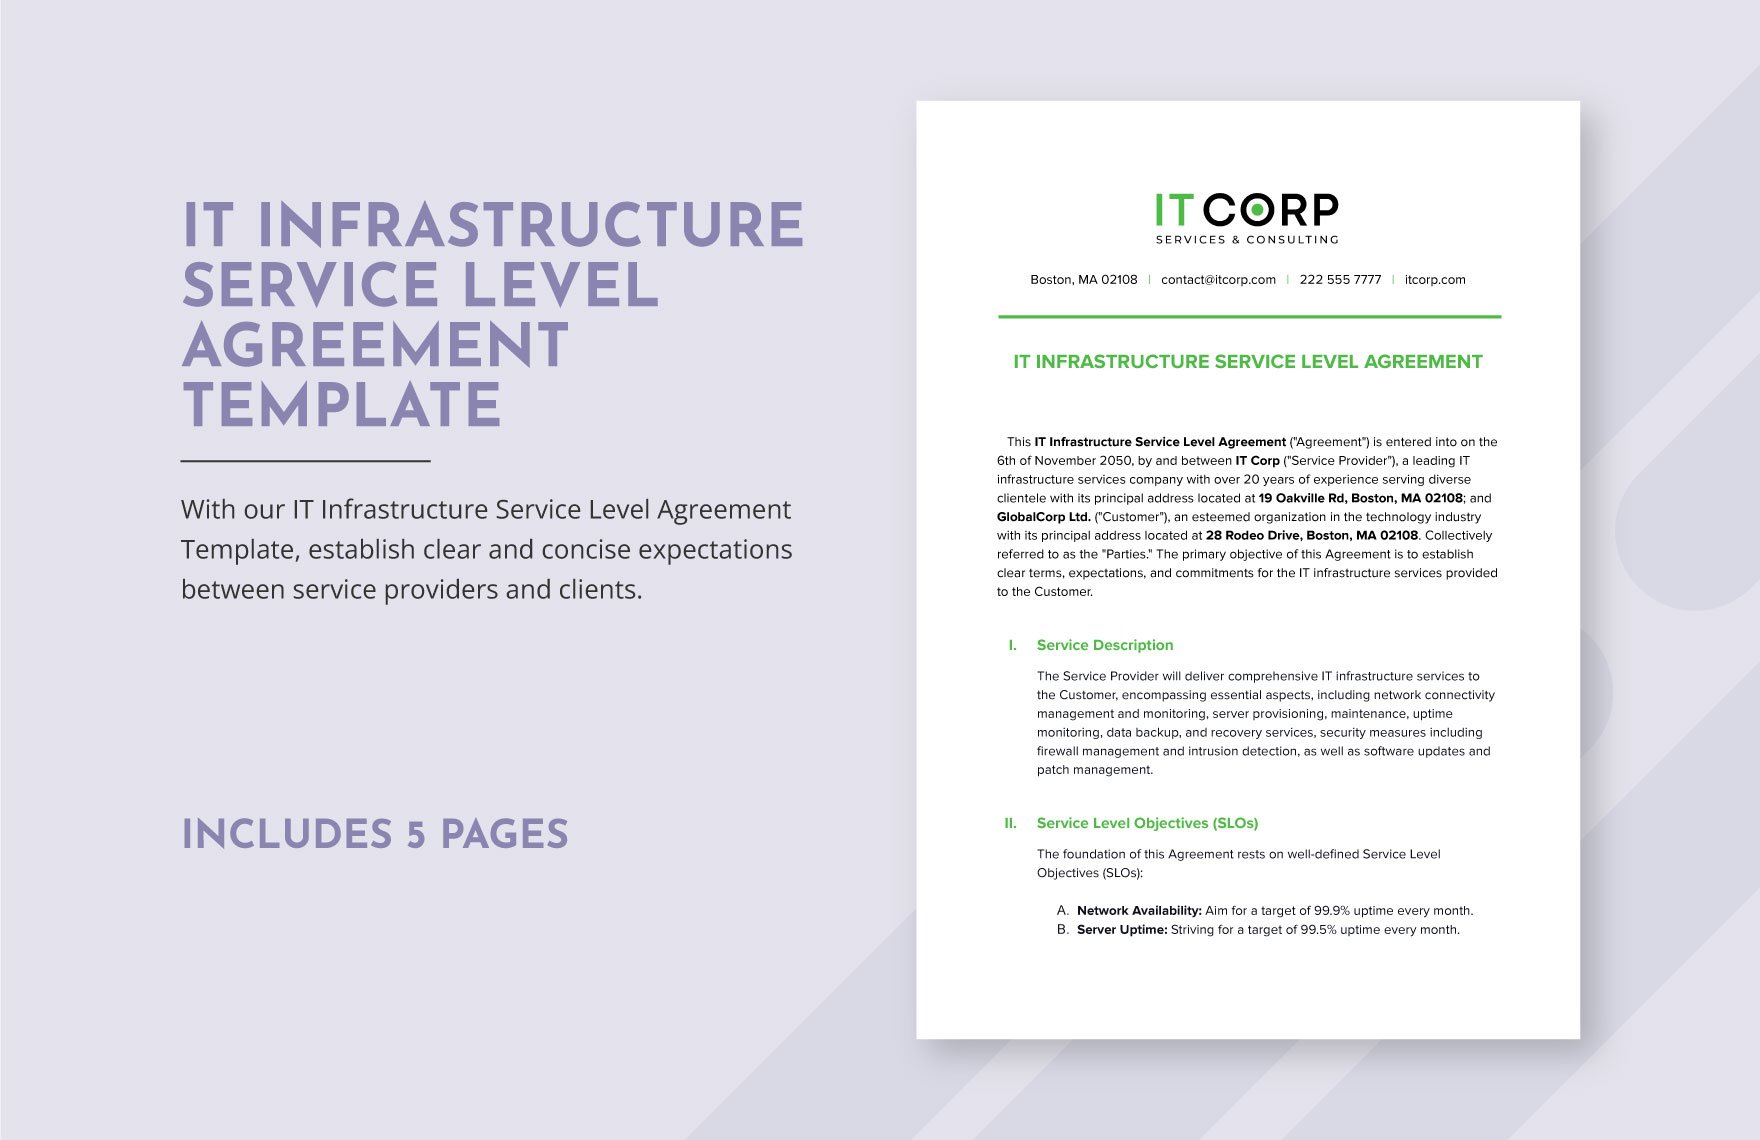 IT Infrastructure Service Level Agreement Template in Word, Google Docs, PDF